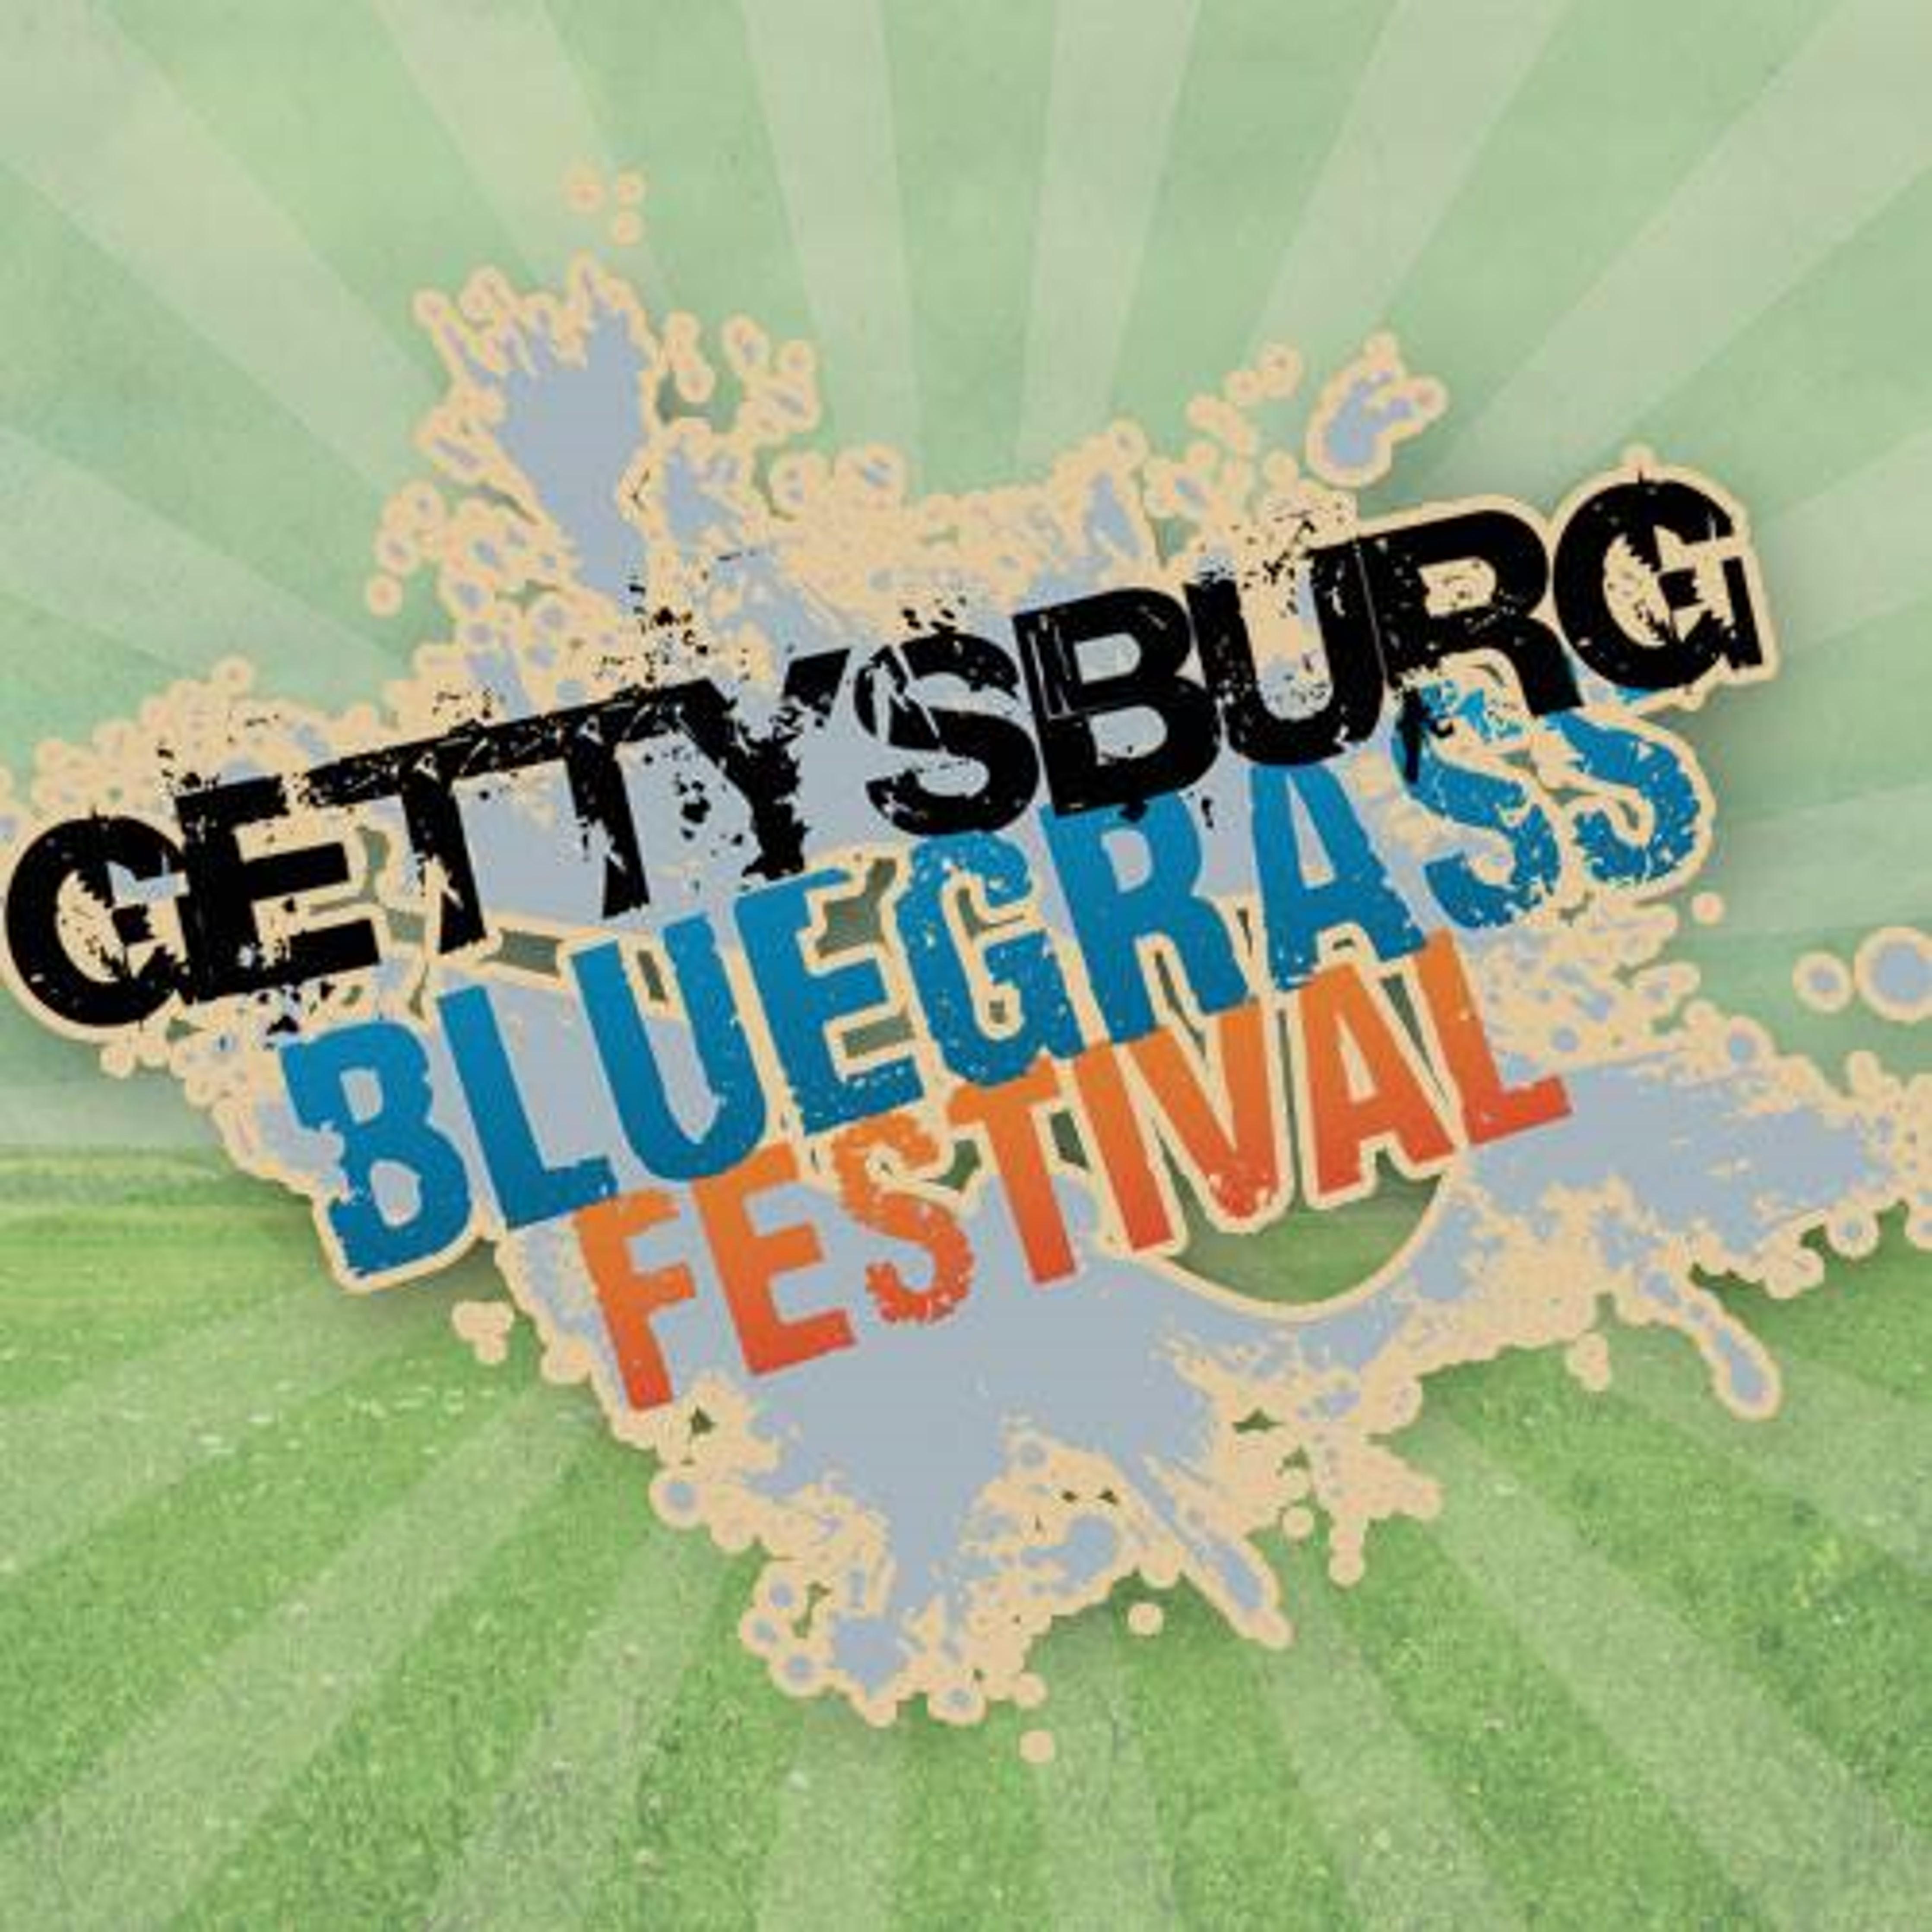 Gettysburg Bluegrass Festival Festival Lineup, Dates and Location